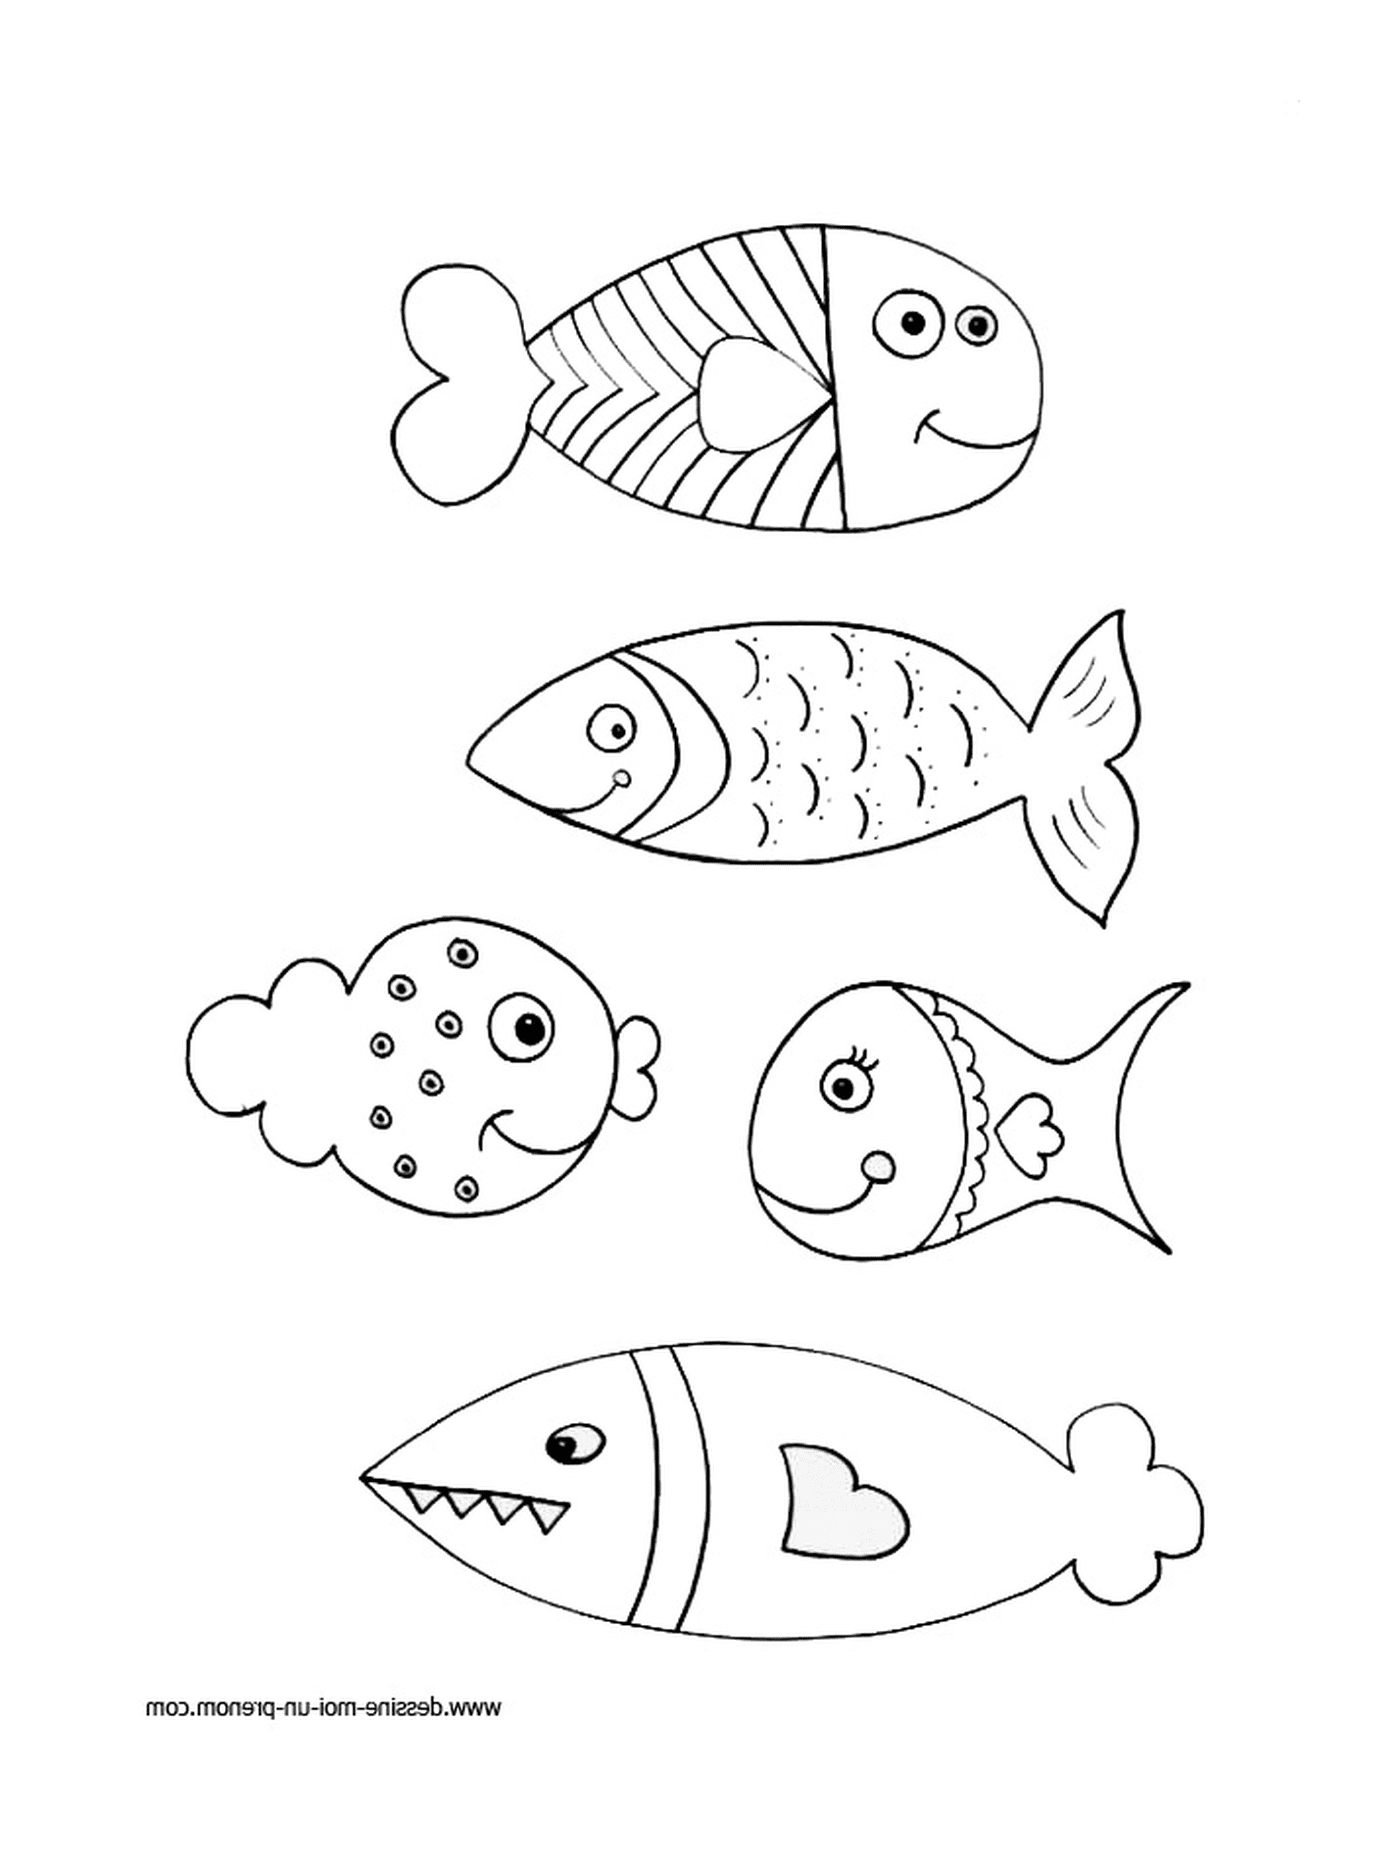  Aligned Fish Group 